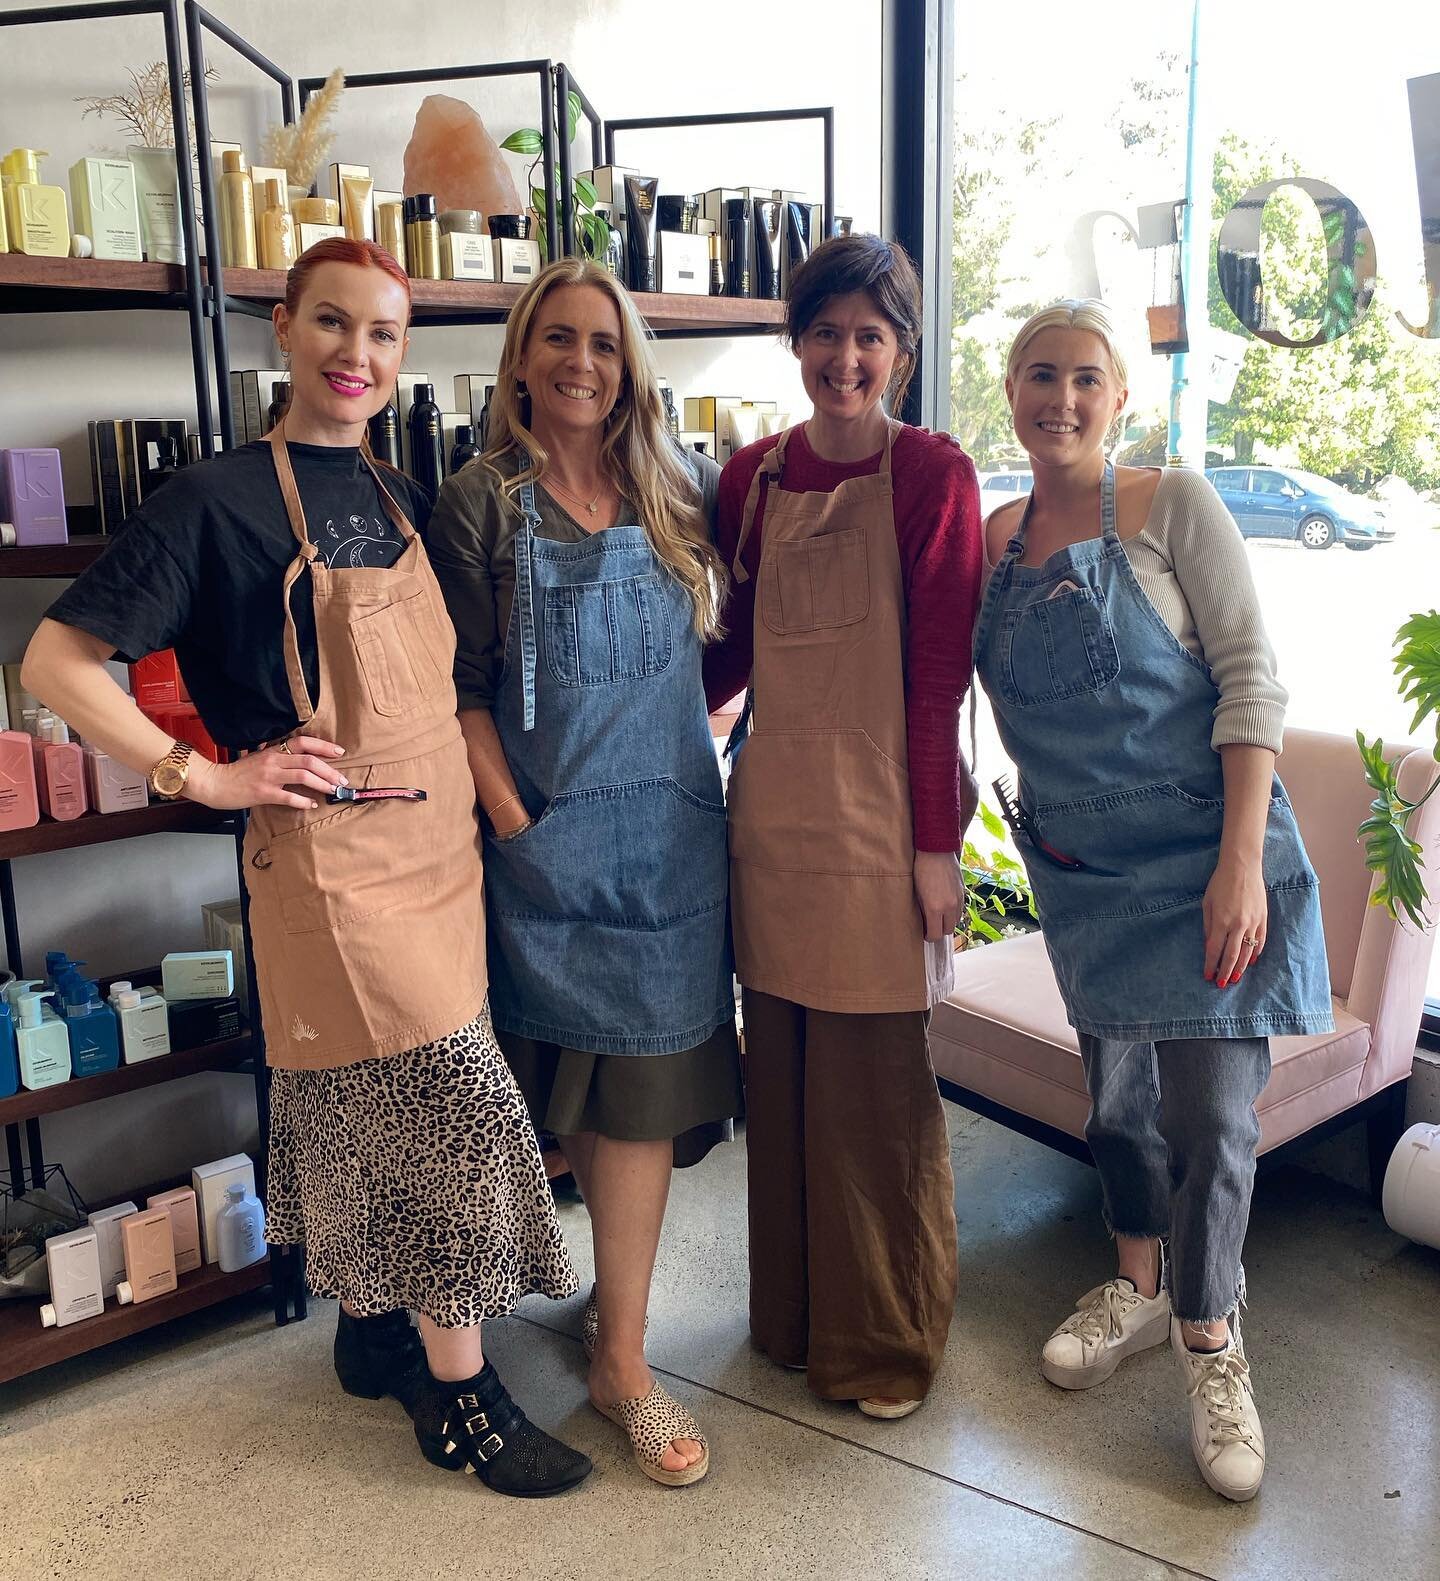 New @norpa_and_co aprons for the Epsilon gals 🤗 this Tauranga based online company has awesome hairdressing aprons and colour tools - check them out online to support local small business 
.
.
.
.
.
.
#epsilonhair #epsilonexperience #mtmaunganuihair